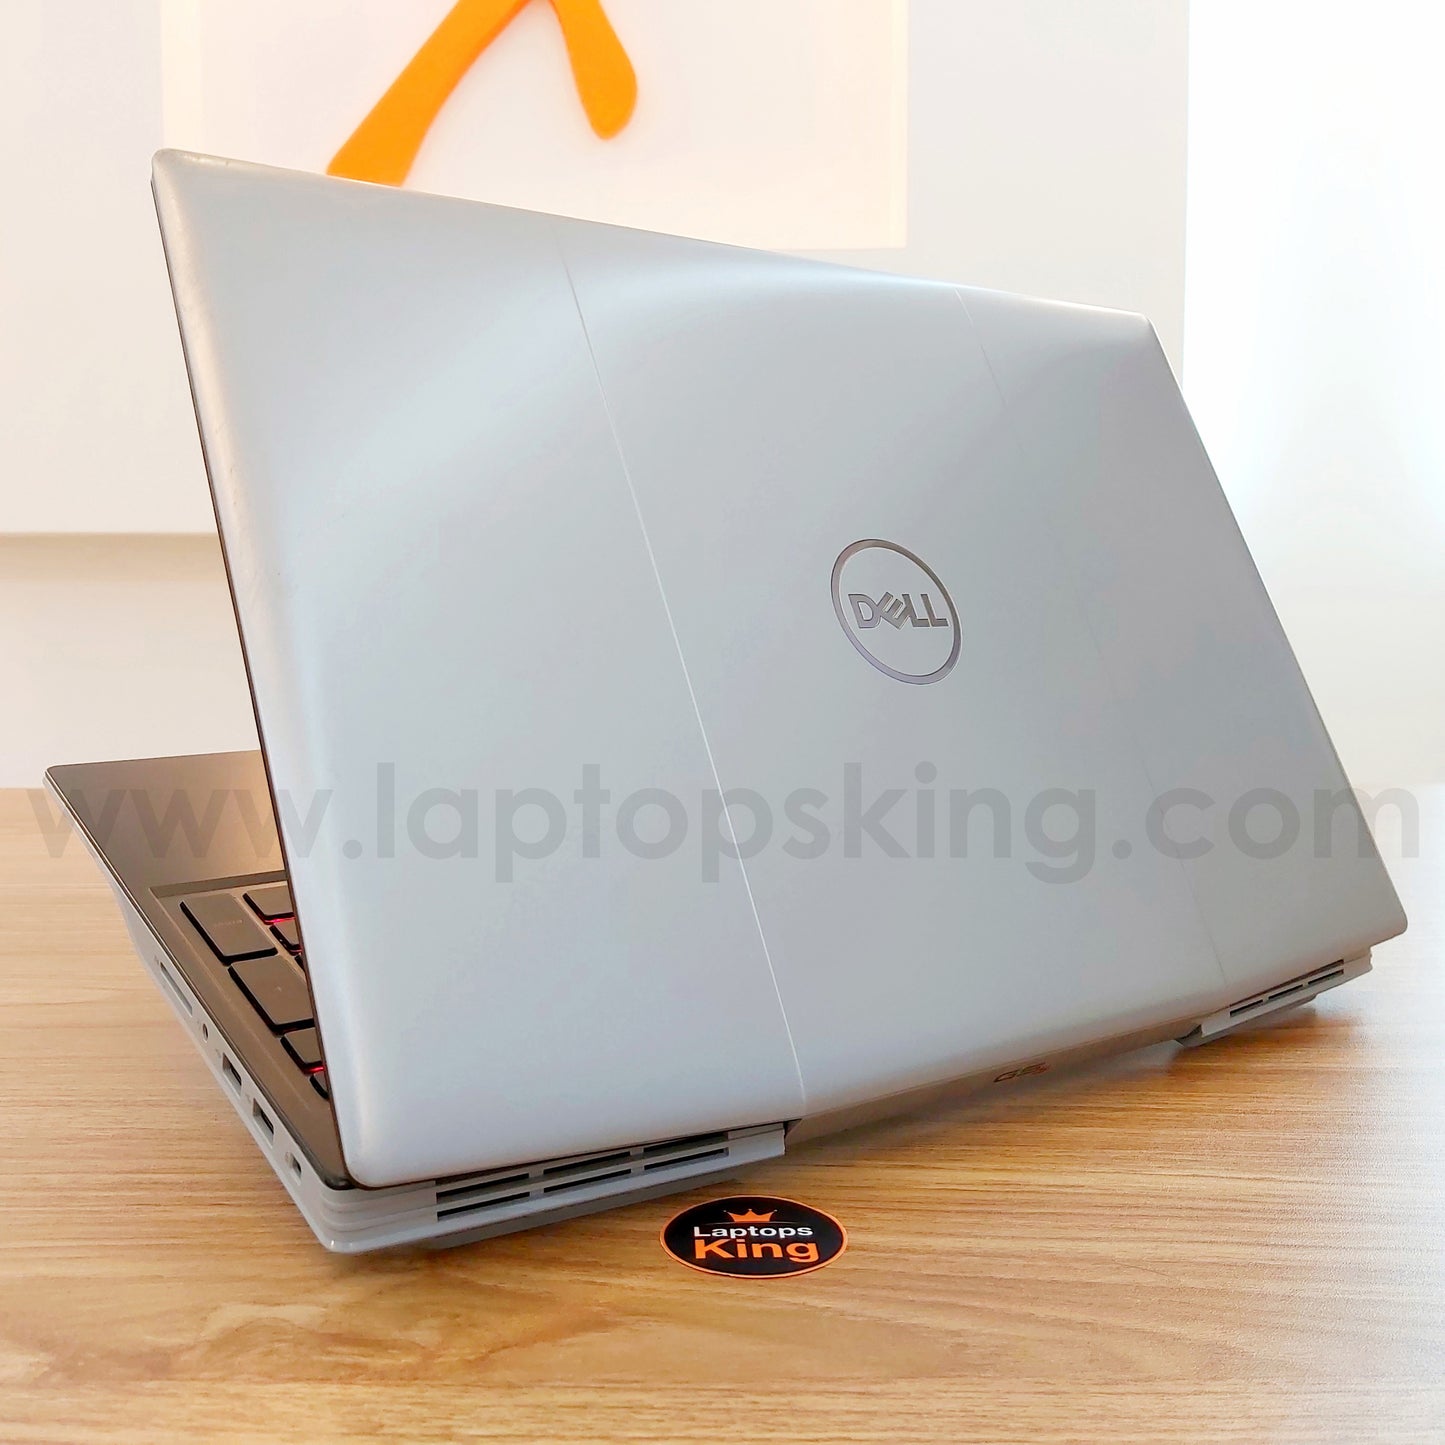 Dell G5 5505 Ryzen 5 4600h Radeon Rx 5600m Gaming Laptop (Used Very Clean) Gaming laptop, Graphic Design laptop, best laptop for gaming, best laptop for graphic design, computer for sale Lebanon, laptop for video editing in Lebanon, laptop for sale Lebanon, best graphic design laptop,	best video editing laptop, best programming laptop, laptop for sale in Lebanon, laptops for sale in Lebanon, laptop for sale in Lebanon, buy computer Lebanon, buy laptop Lebanon.